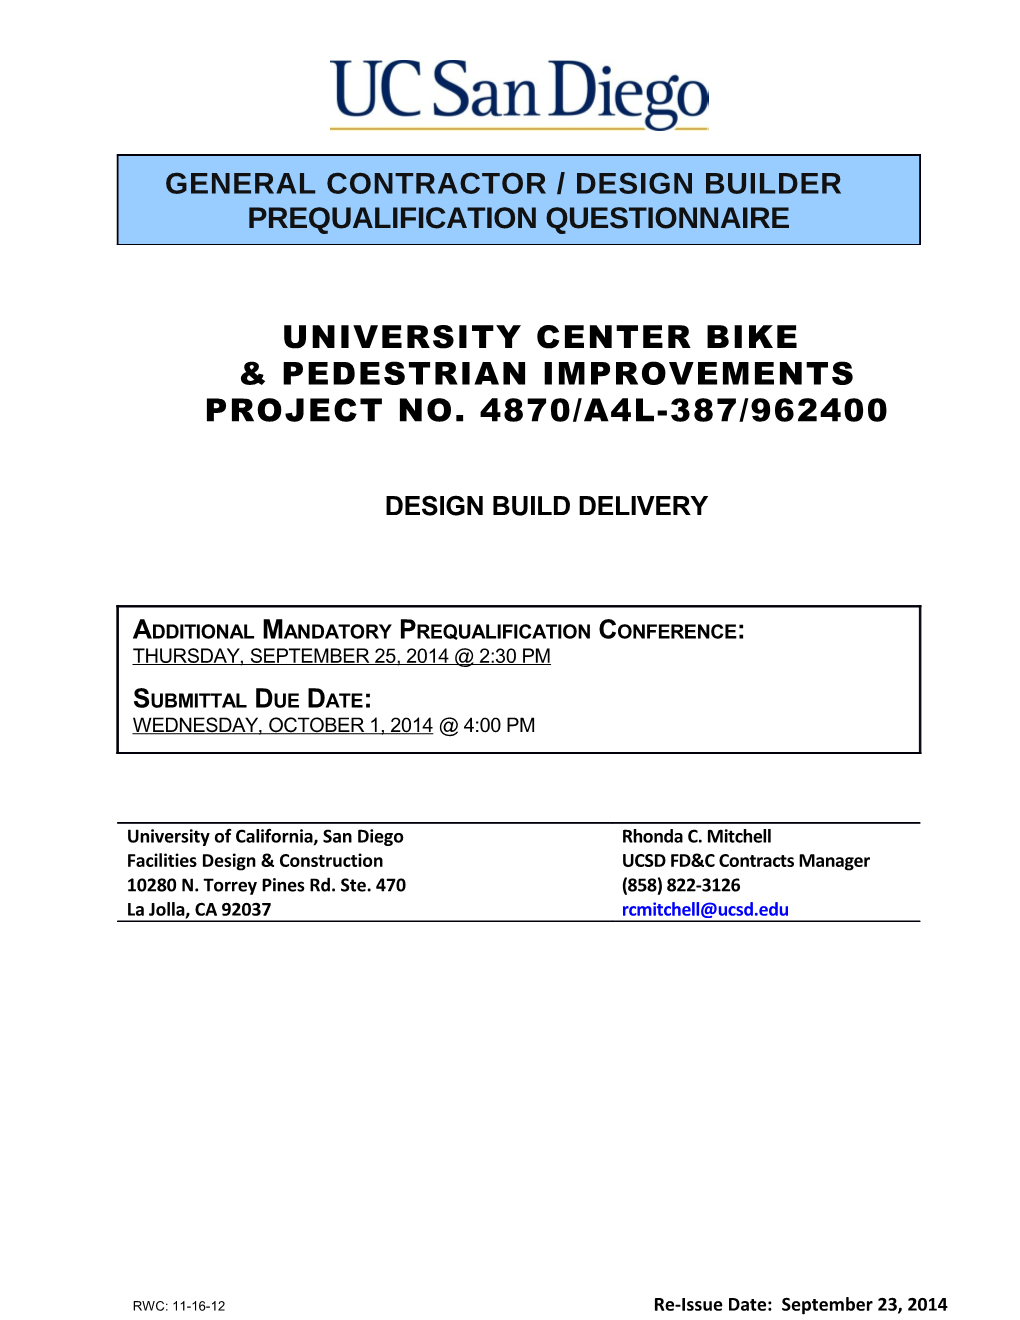 General Contractor / Design Builder Prequalification Questionnaire